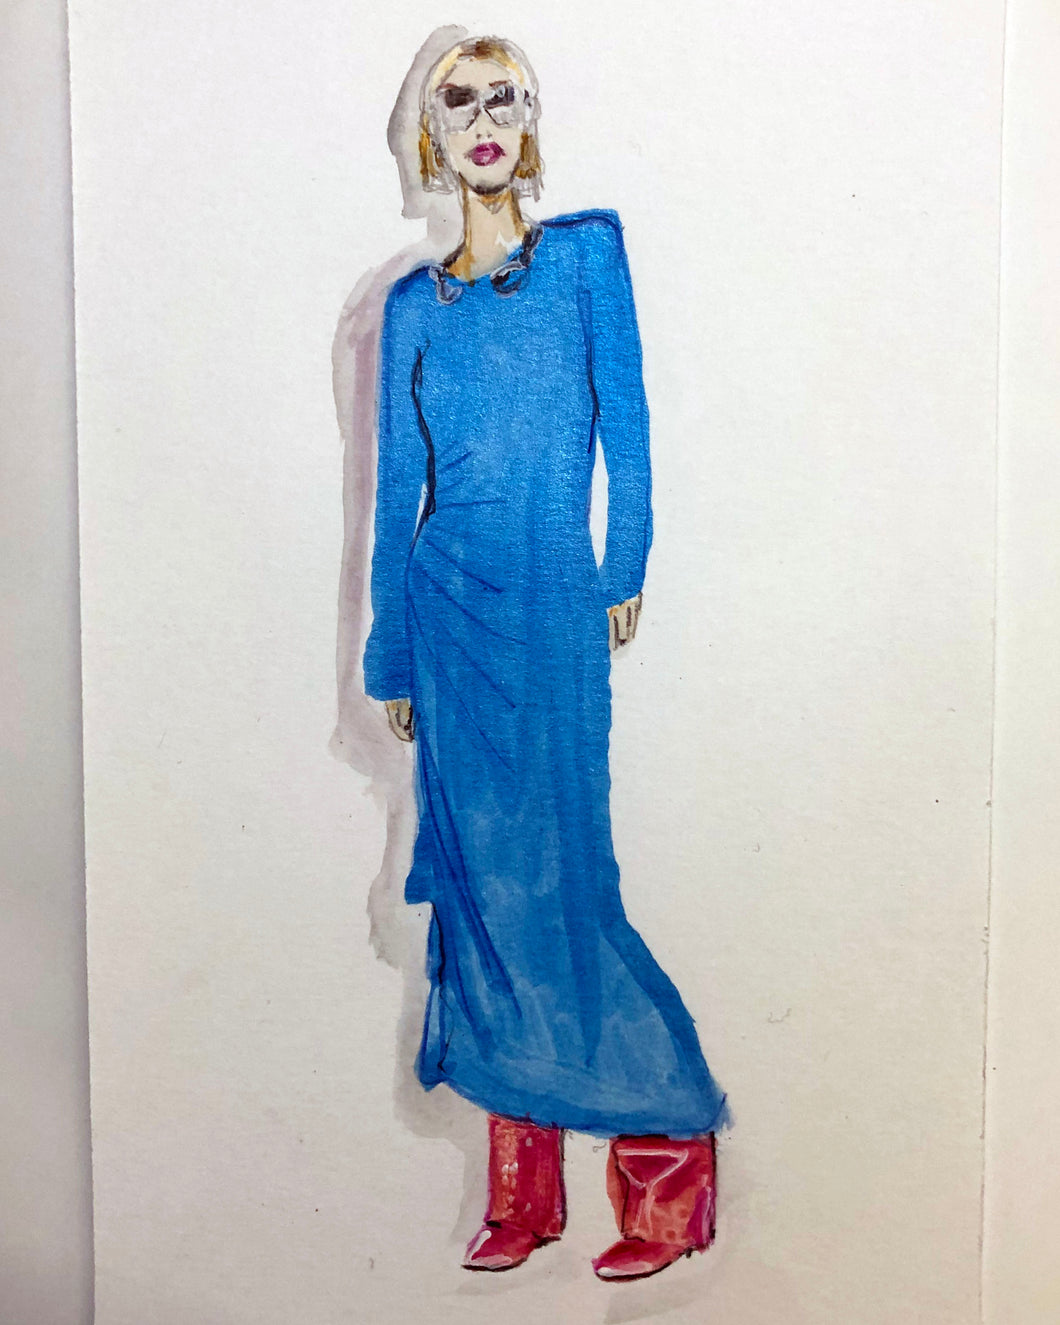 GIVENCHY - AW'23 - Paris fashion illustration - blue dress and pink boots